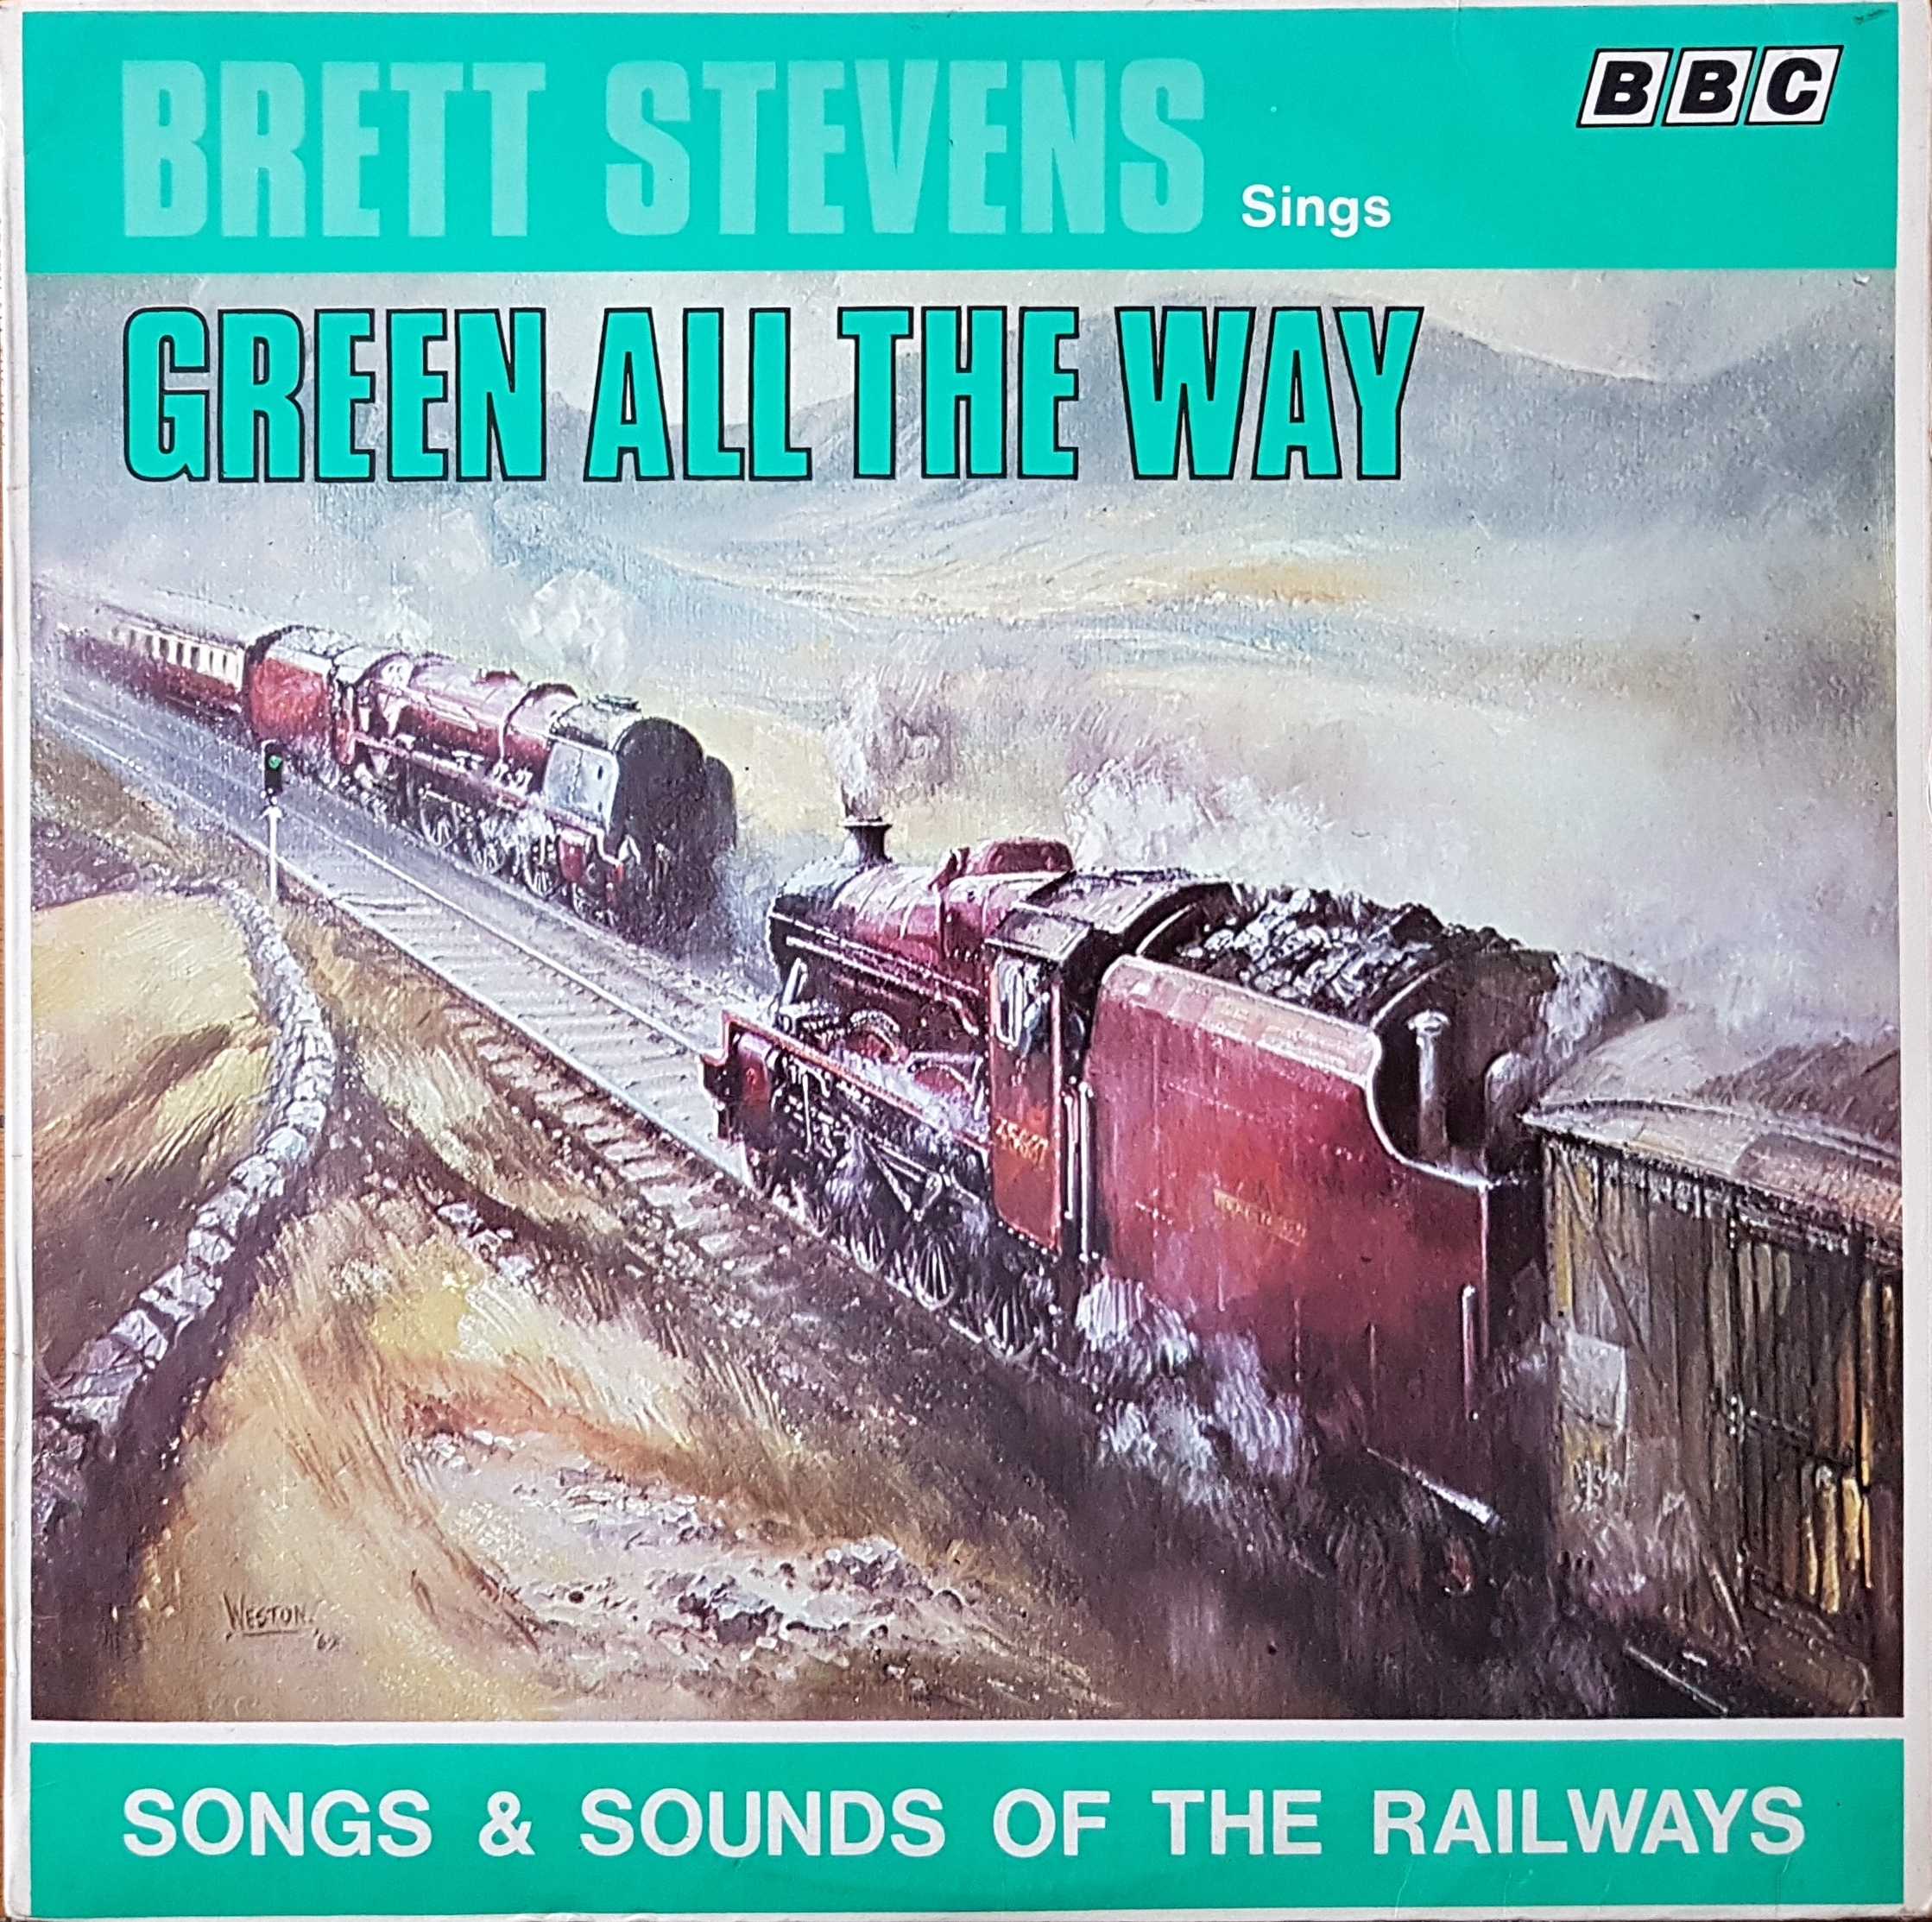 Picture of REB 45 Green all the way - Songs and sounds of the railway by artist Various from the BBC albums - Records and Tapes library